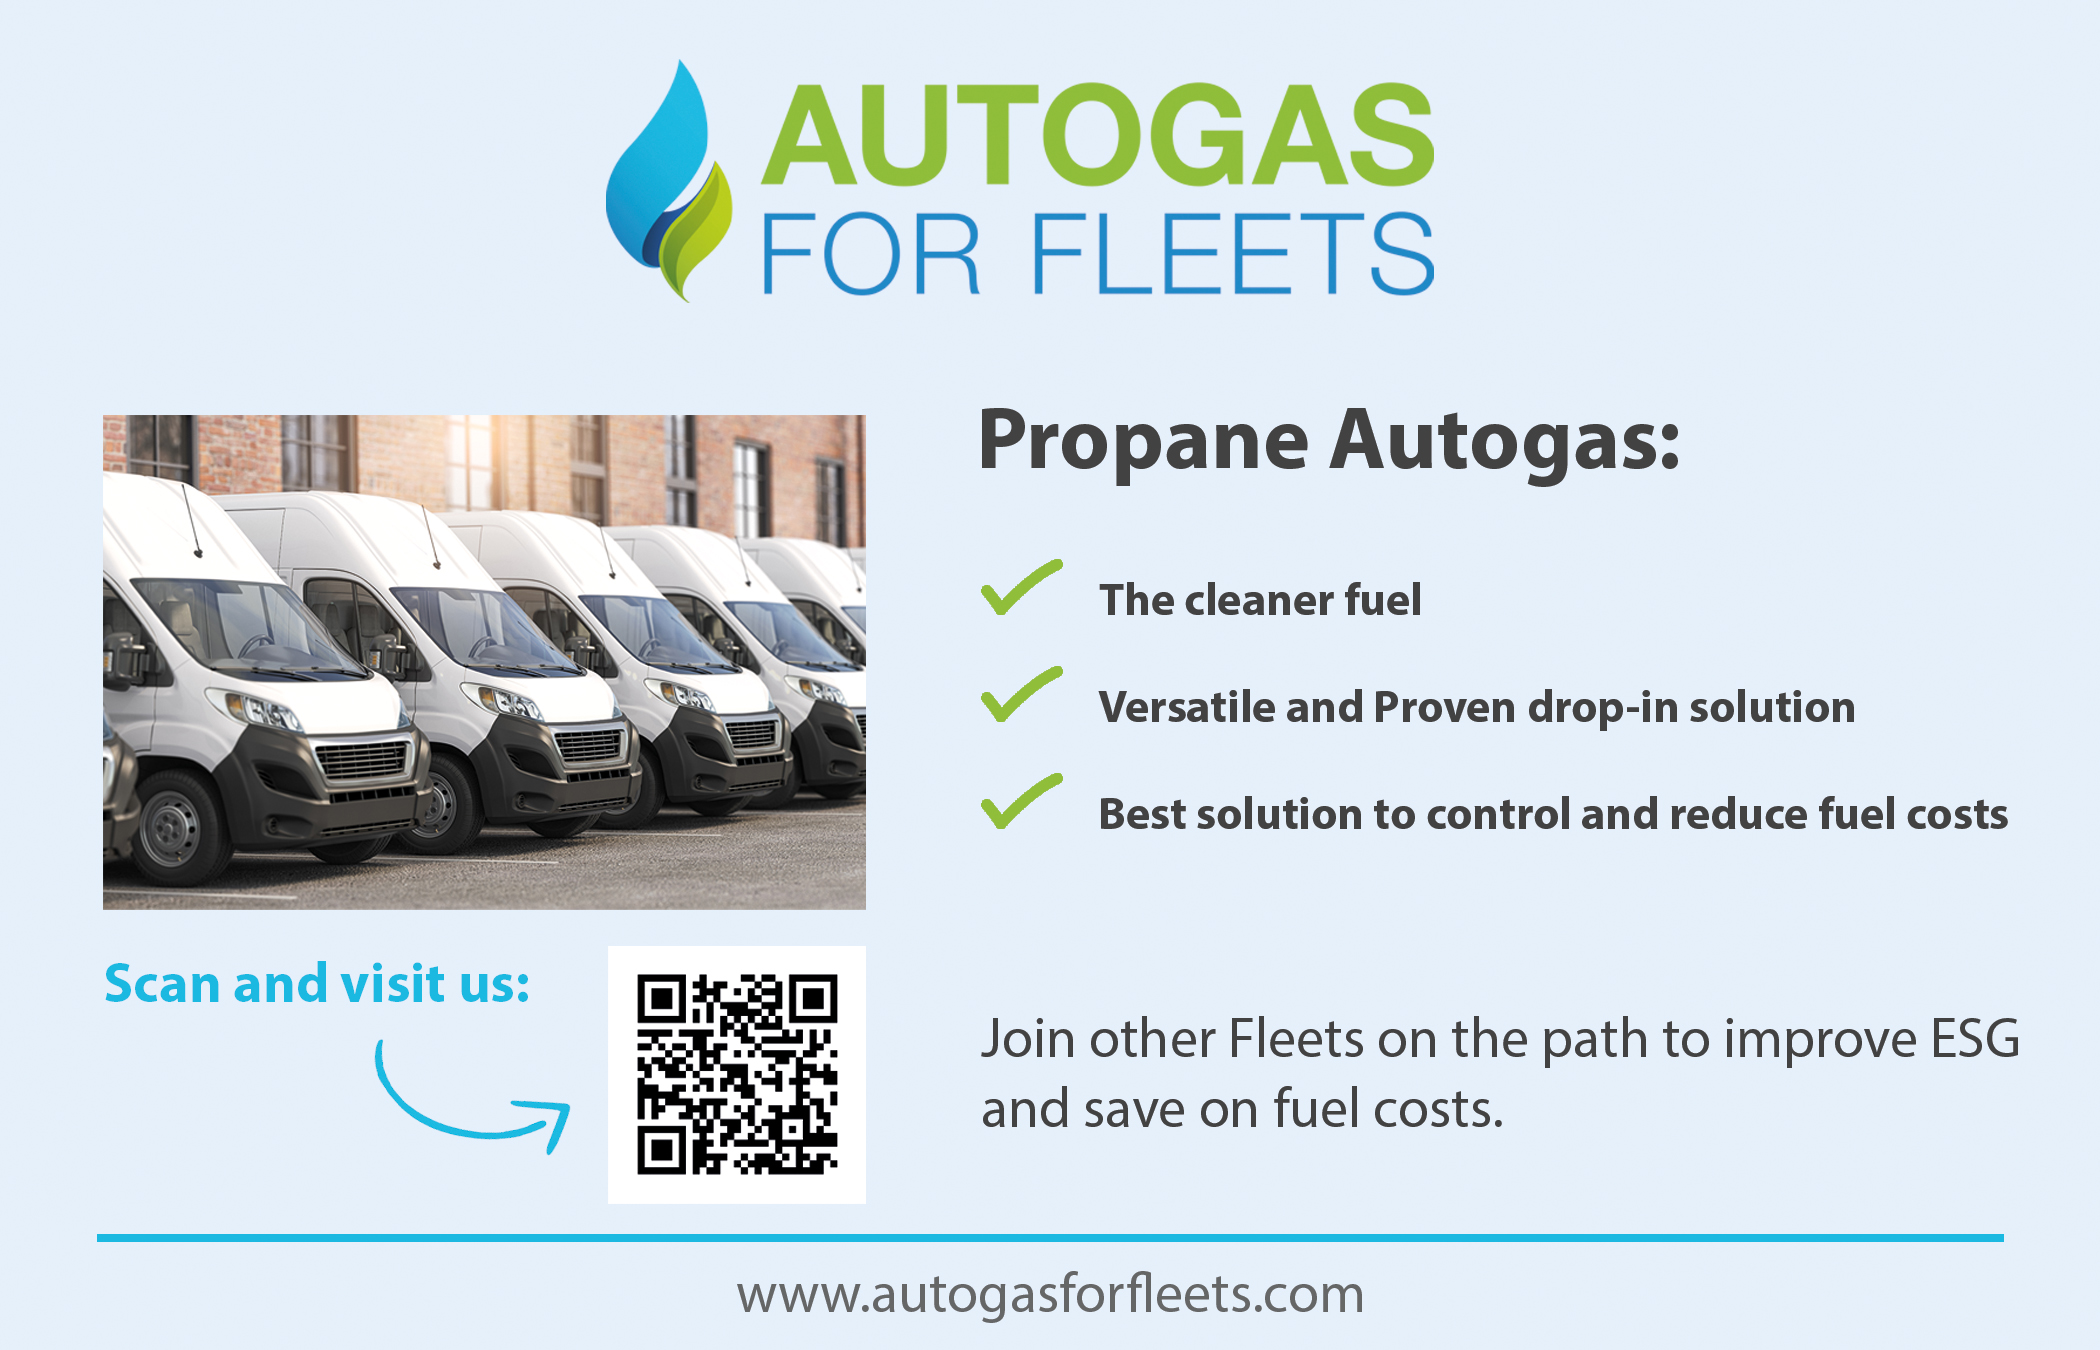 Advertising autogas for fleets website in BPN magazine